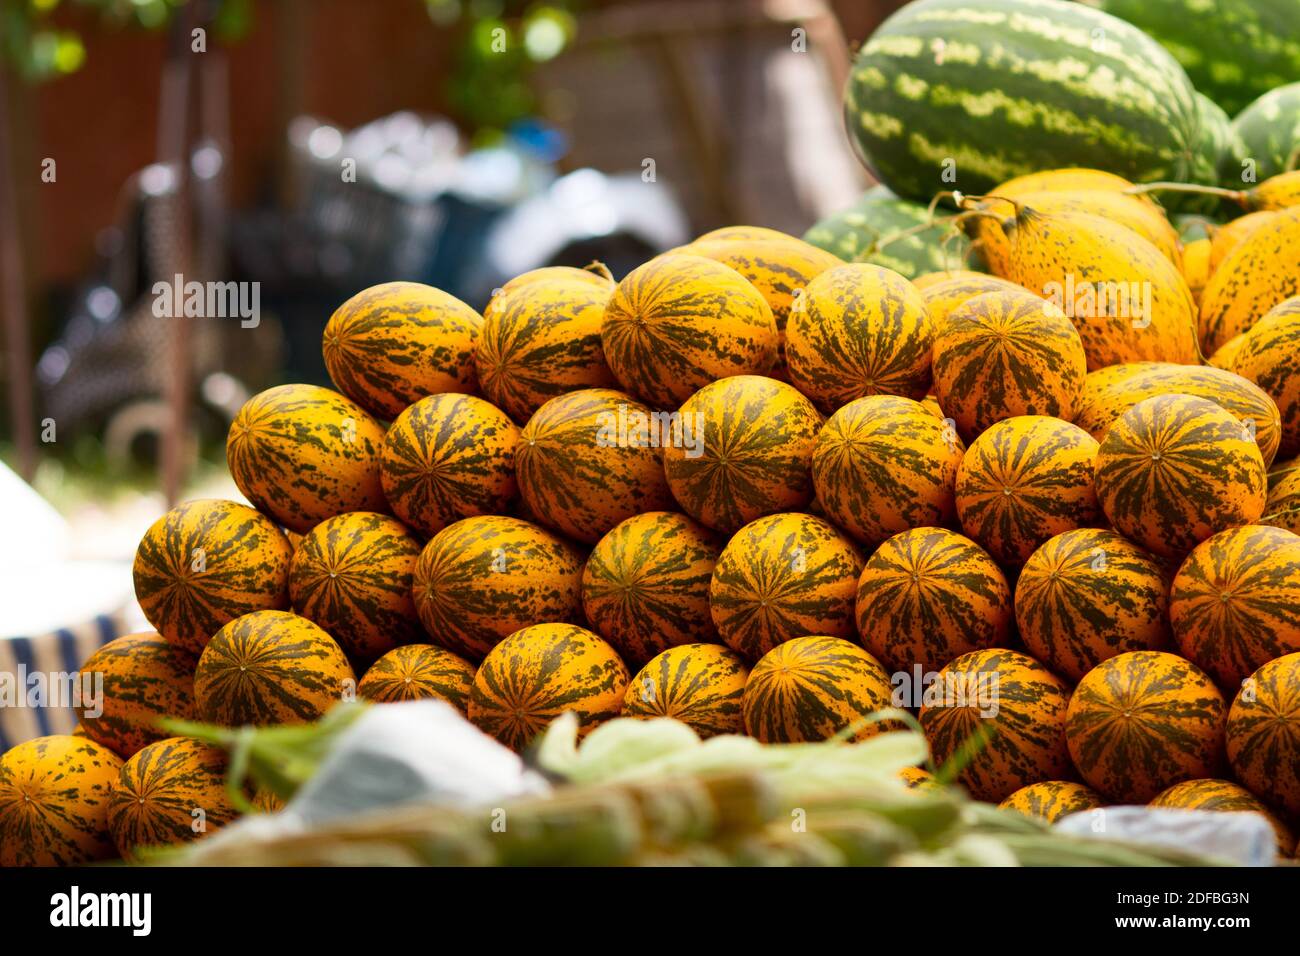 Yellow melons on display at the farmer's market. Fresh and healthy eating. Markets outdoors Stock Photo